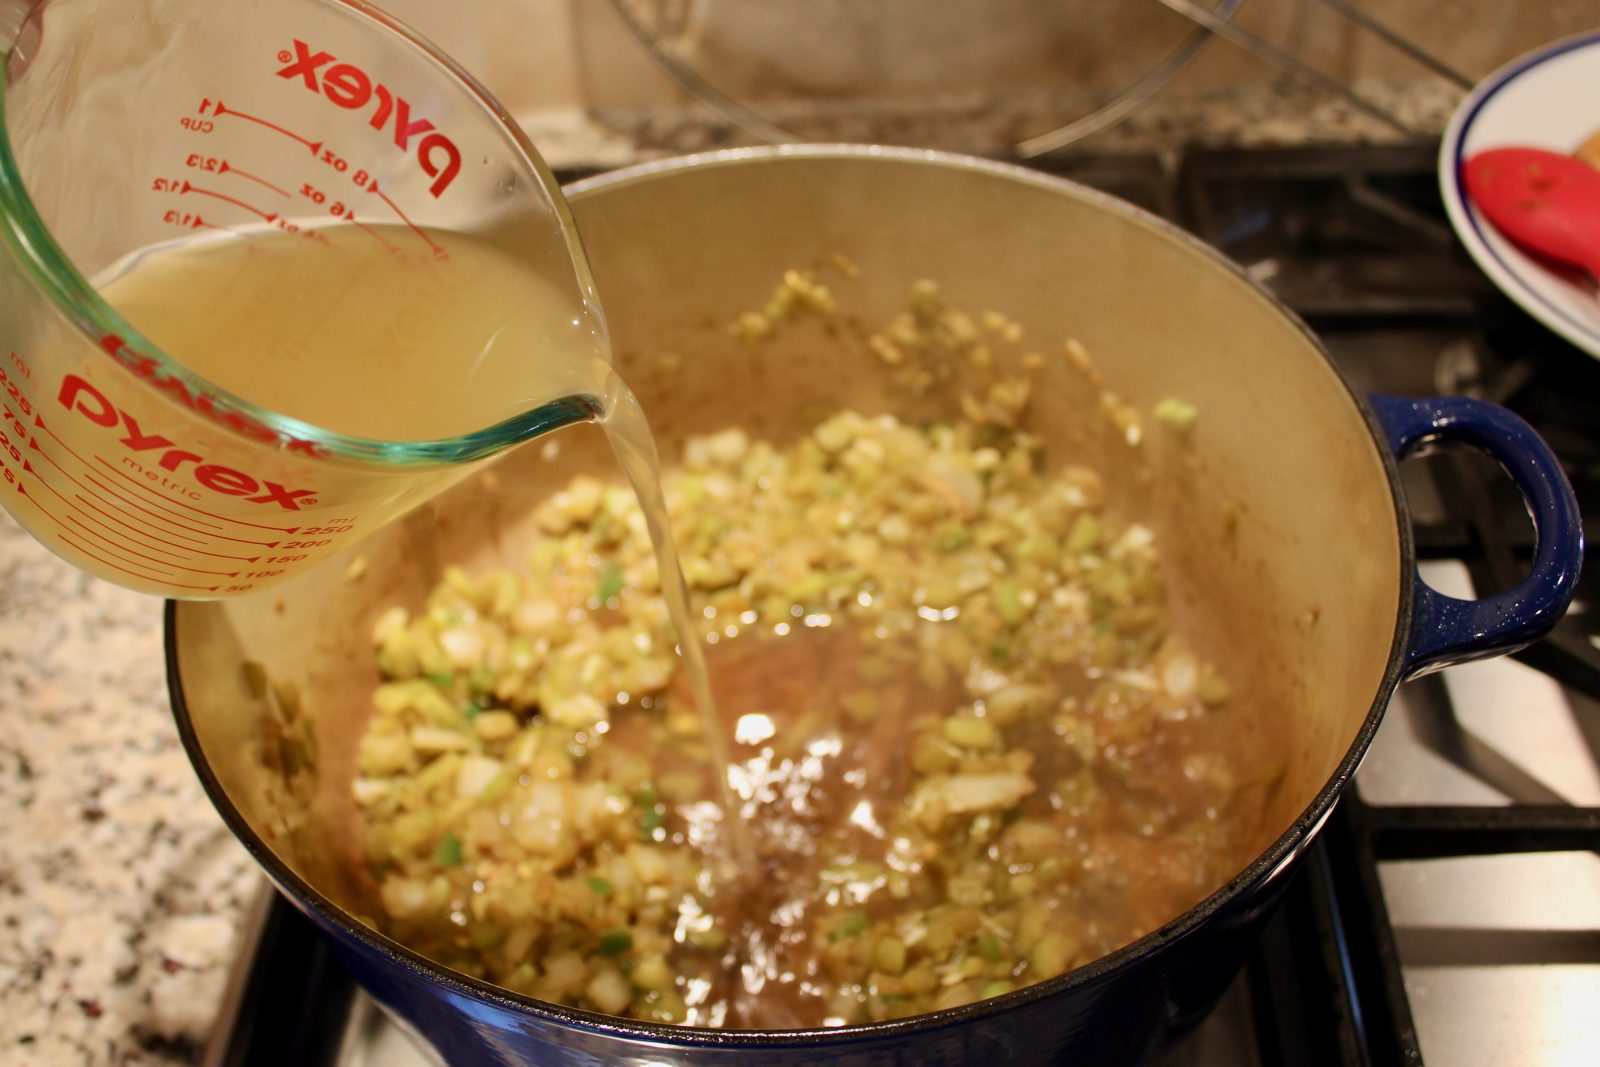 Recipe photo for White Chicken Chili showing adding chicken broth from a glass pyrex measuring cup into a blue Le Creuset dutch oven with sautéed onion, celery, jalapeños and green chilies in the pot.  The pot is on a gas stovetop.